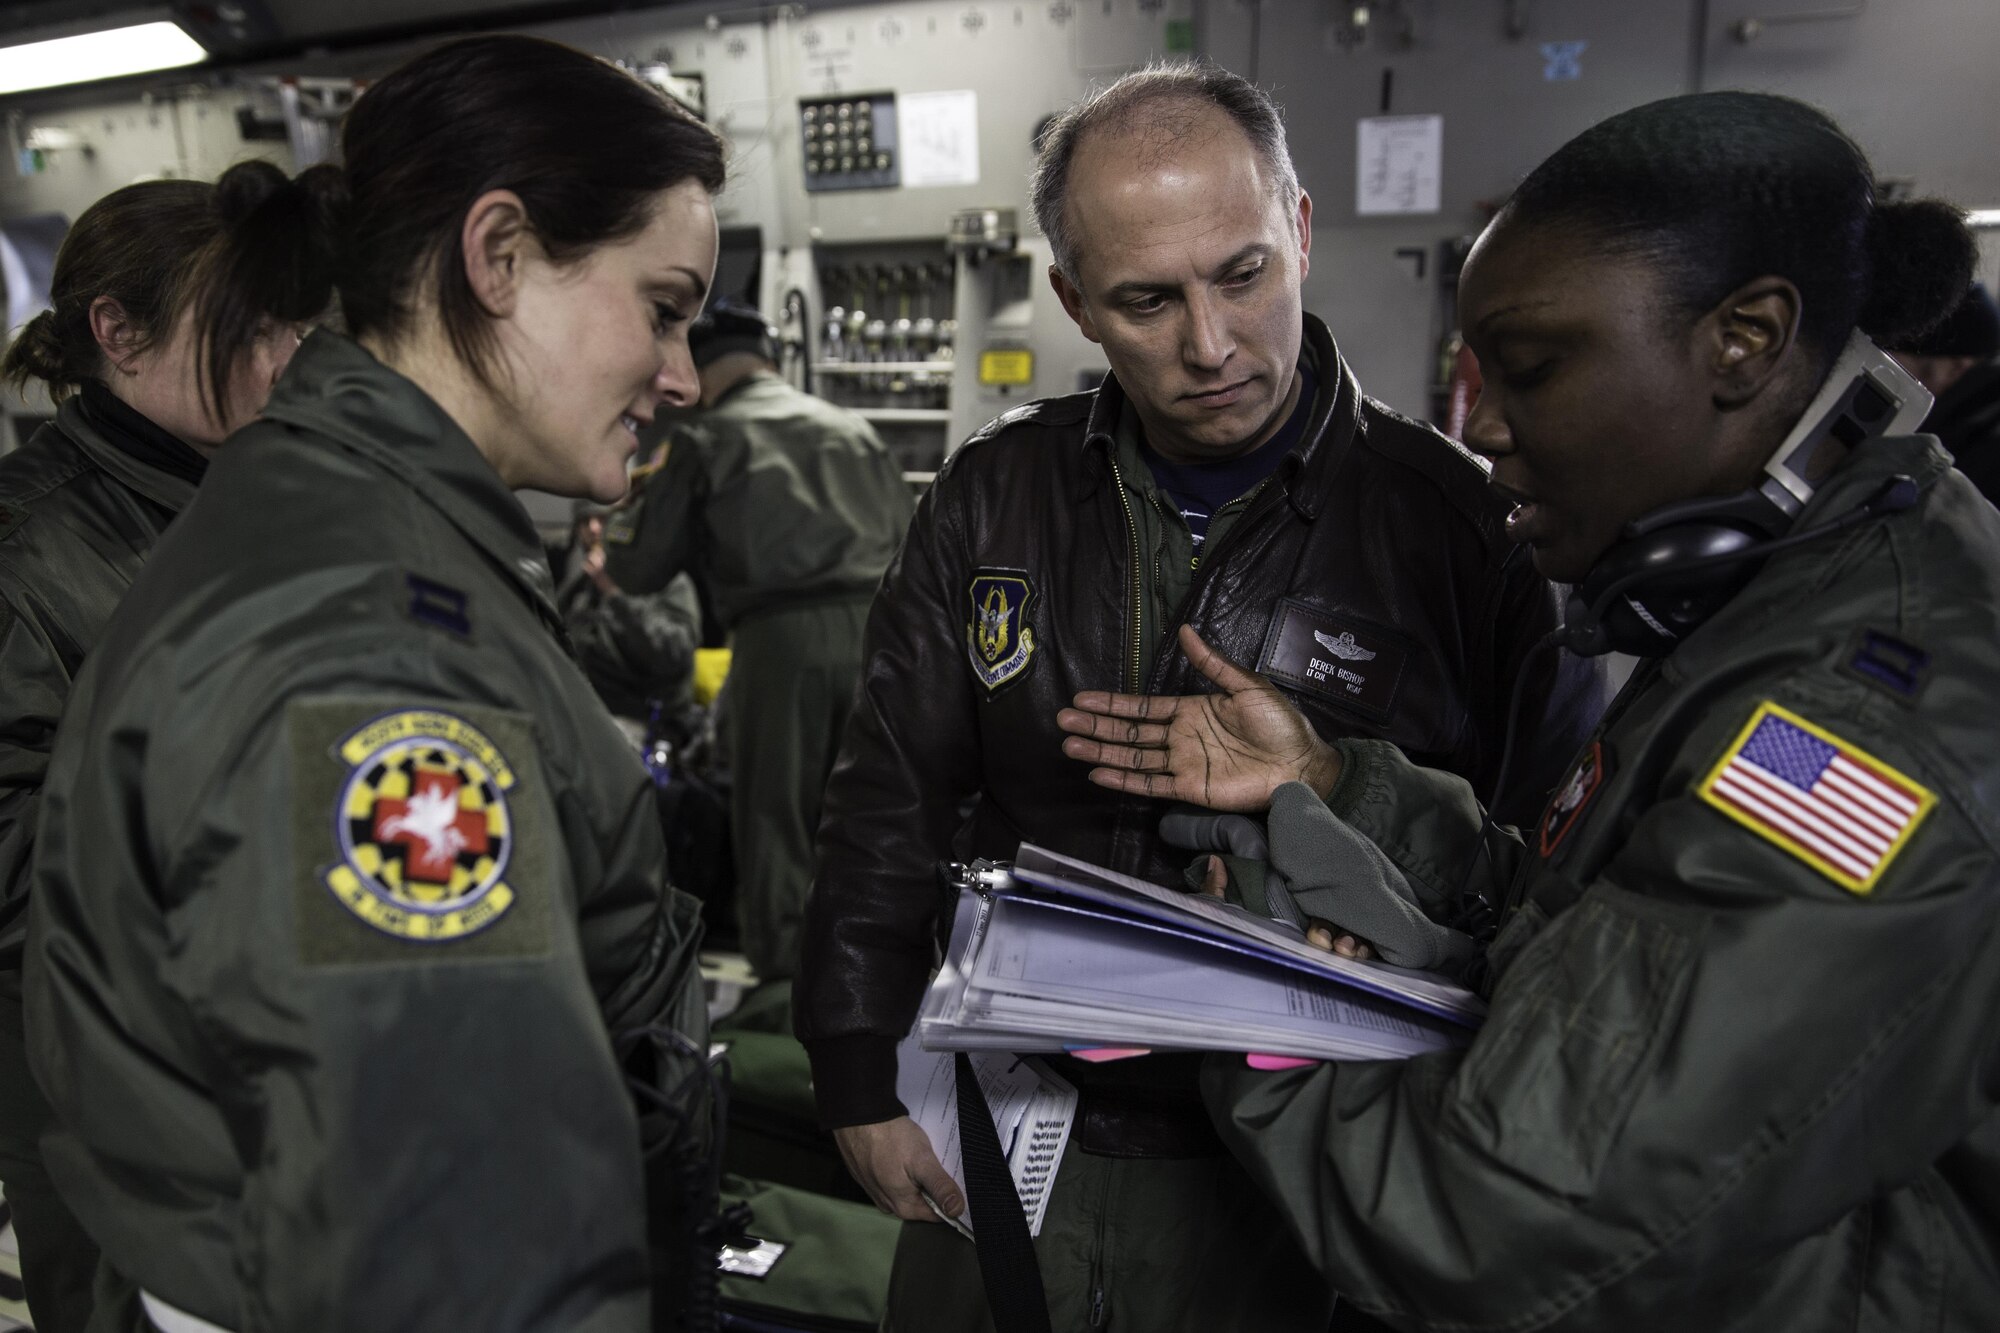 Lt. Col. Derek Bishop reviews the day’s aeromedical plan with Capt. Katie Pittinger and Capt. Elizabeth Kotey prior to taking flight Feb. 21, 2015 during a training mission in San Juan, Puerto Rico. The training mission was part of a three day fly-away with Airmen from the 315th Airlift Wing at Joint Base Charleston, South Carolina and aeromedical Airmen from the 459th Air Refueling Wing at Joint Base Andrews, Maryland. The training mission was a cost-effective means to accomplish currency items and evaluations for flight crew members and provided C-17 familiarization and proficiency training for aeromedical Airmen. Bishop is the 315th AW safety chief and aircraft commander for the mission, and Pittinger and Kotey are both flight nurses with the 459th Aeromedical Evacuation Squadron (U.S. Air Force Photo/Tech. Sgt. Shane Ellis)
